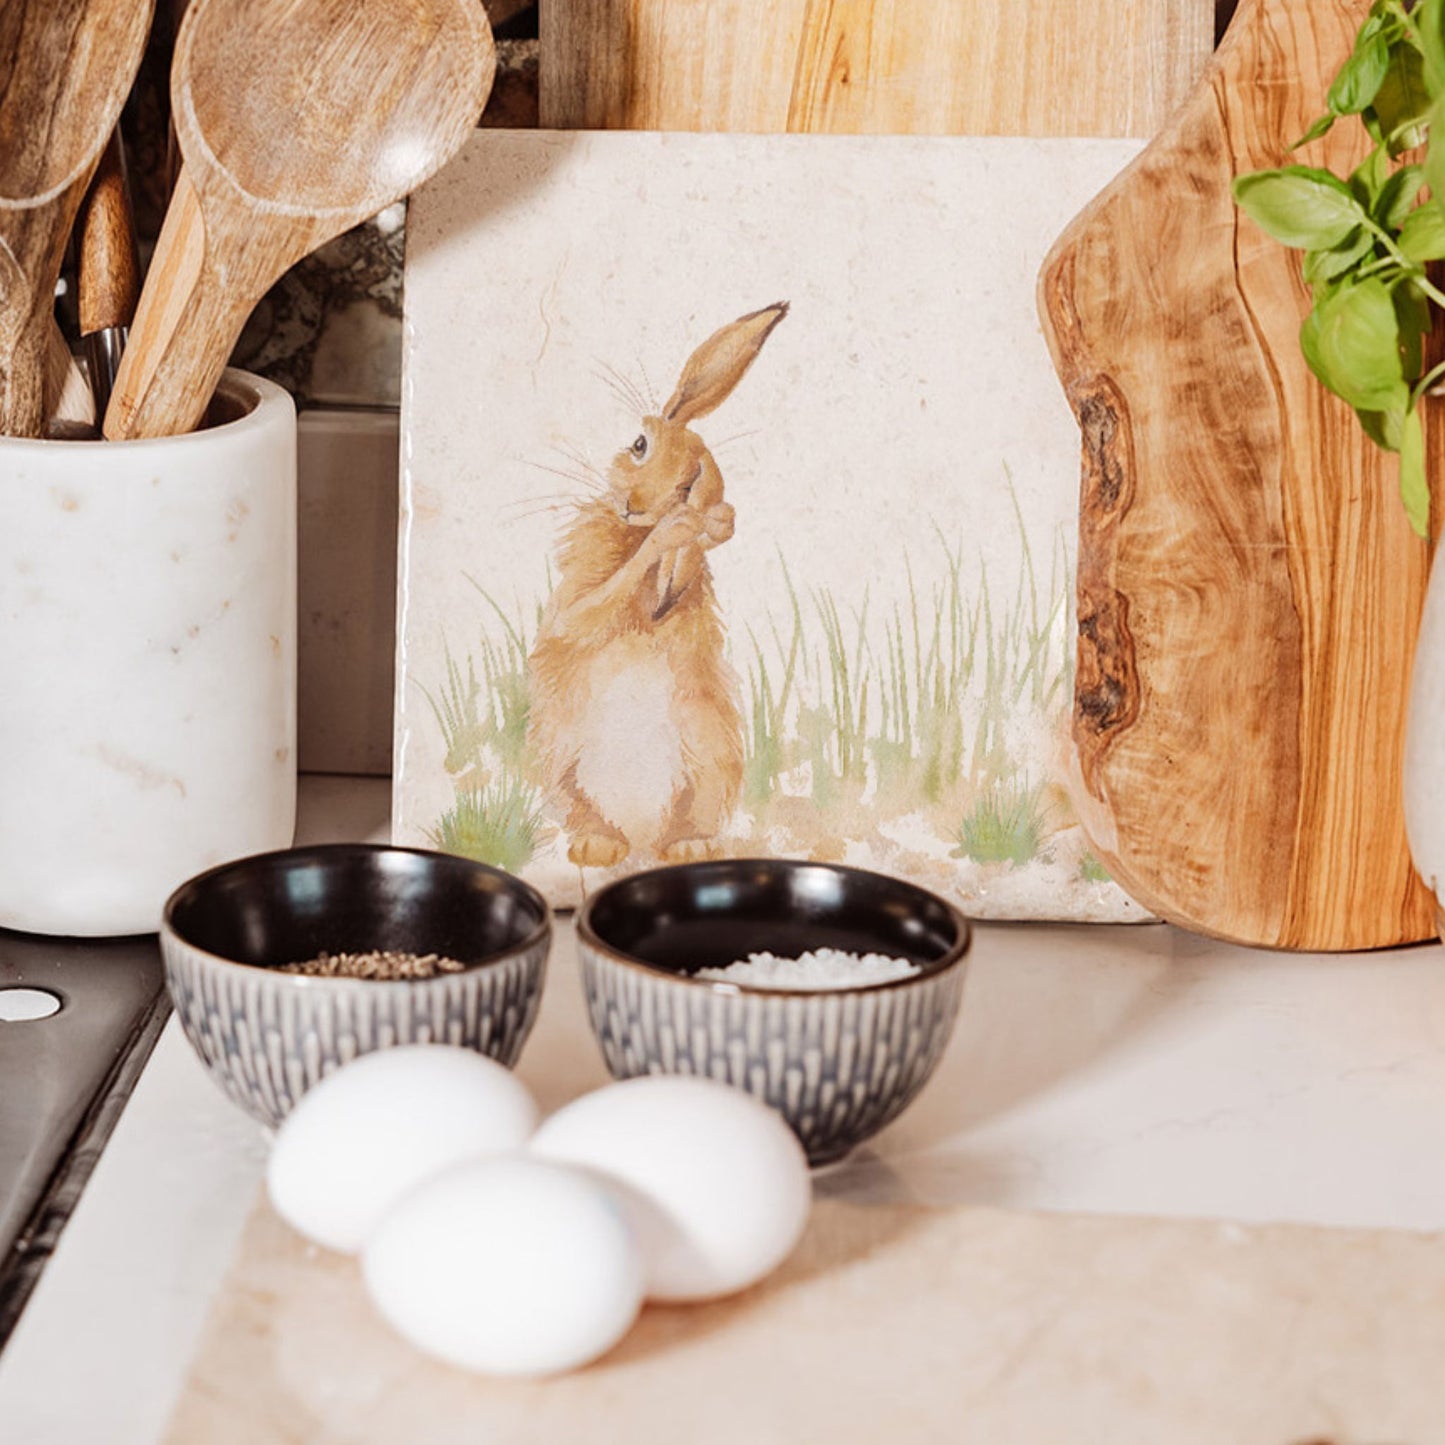 A medium square cream marble platter propped up on a country kitchen worksurface among kitchen utensils and wooden chopping boards. The marble platter features a watercolour design of a hare washing his ear.